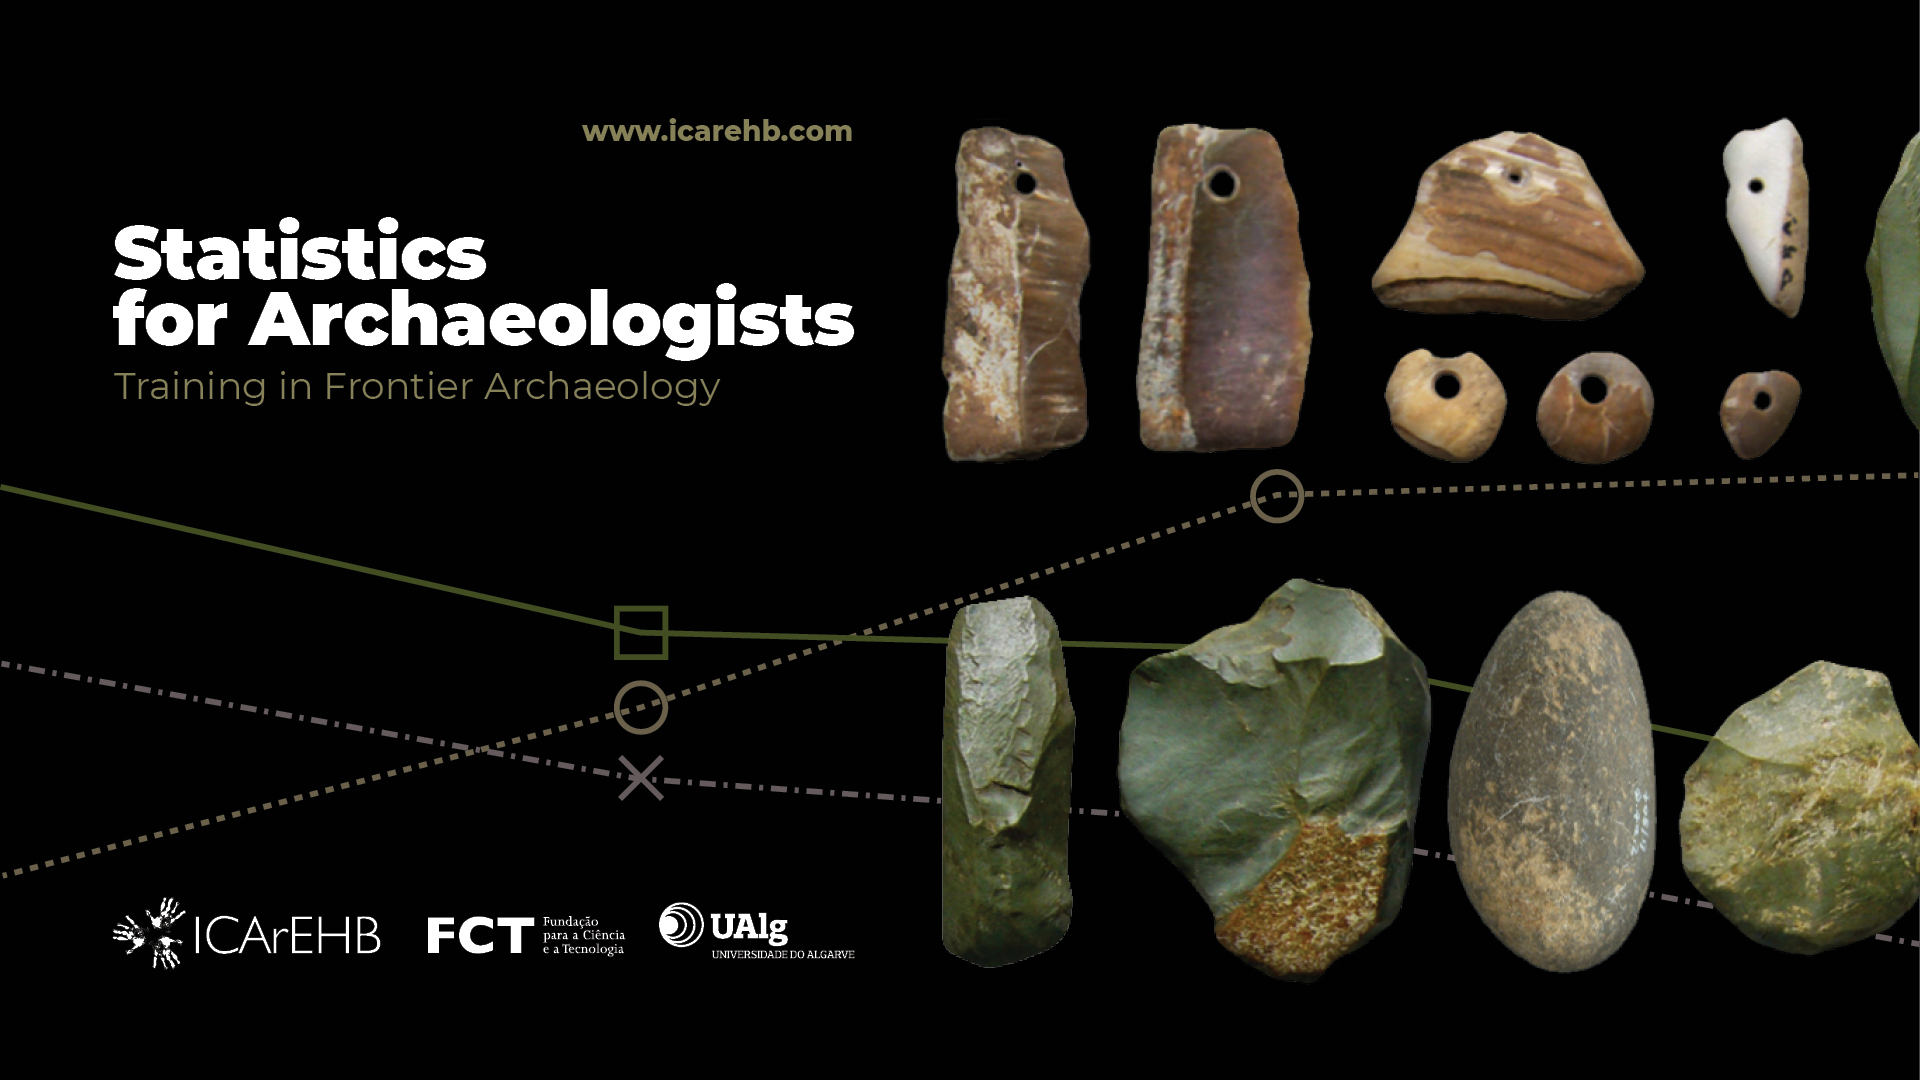 “Statistics for Archaeologists”